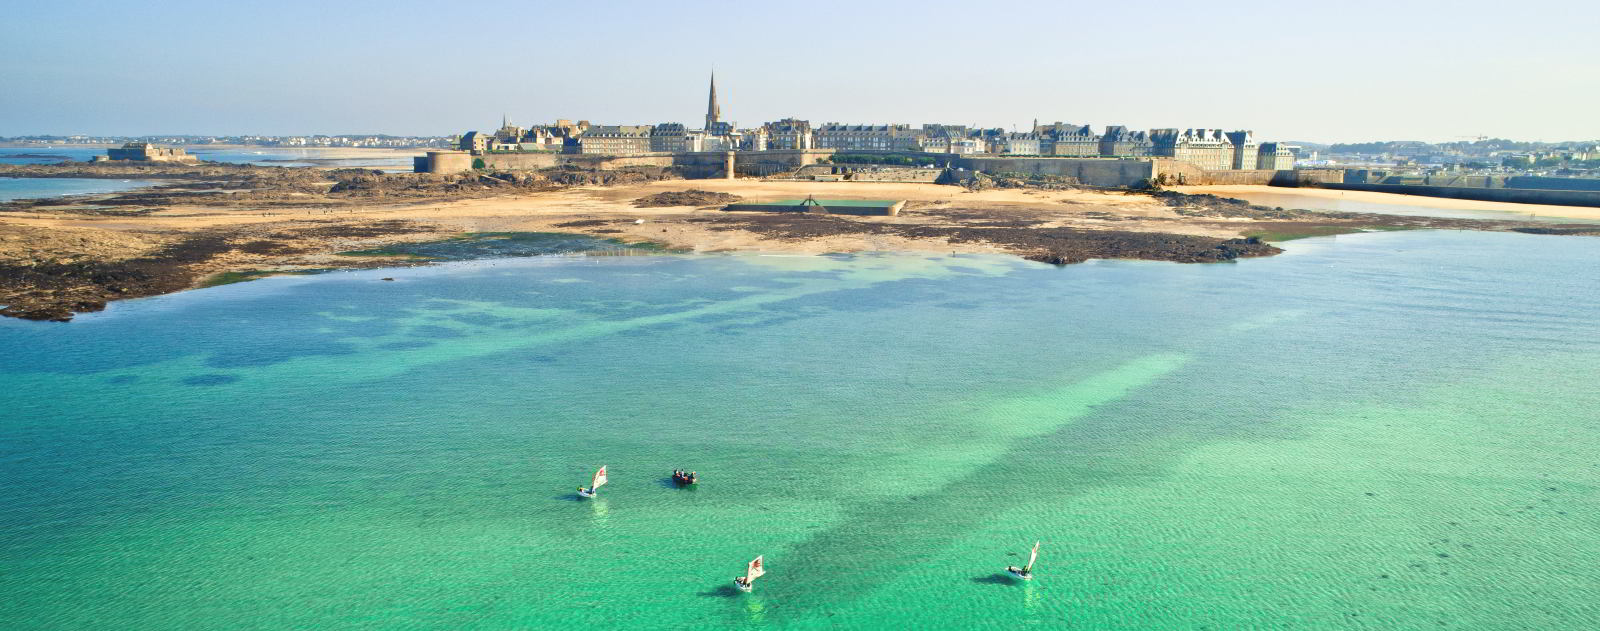 France Brittany Saint-Malo Luxury Holidays with In-Luxe Travel France, The luxury bespoke holidays in France specialist since 2007